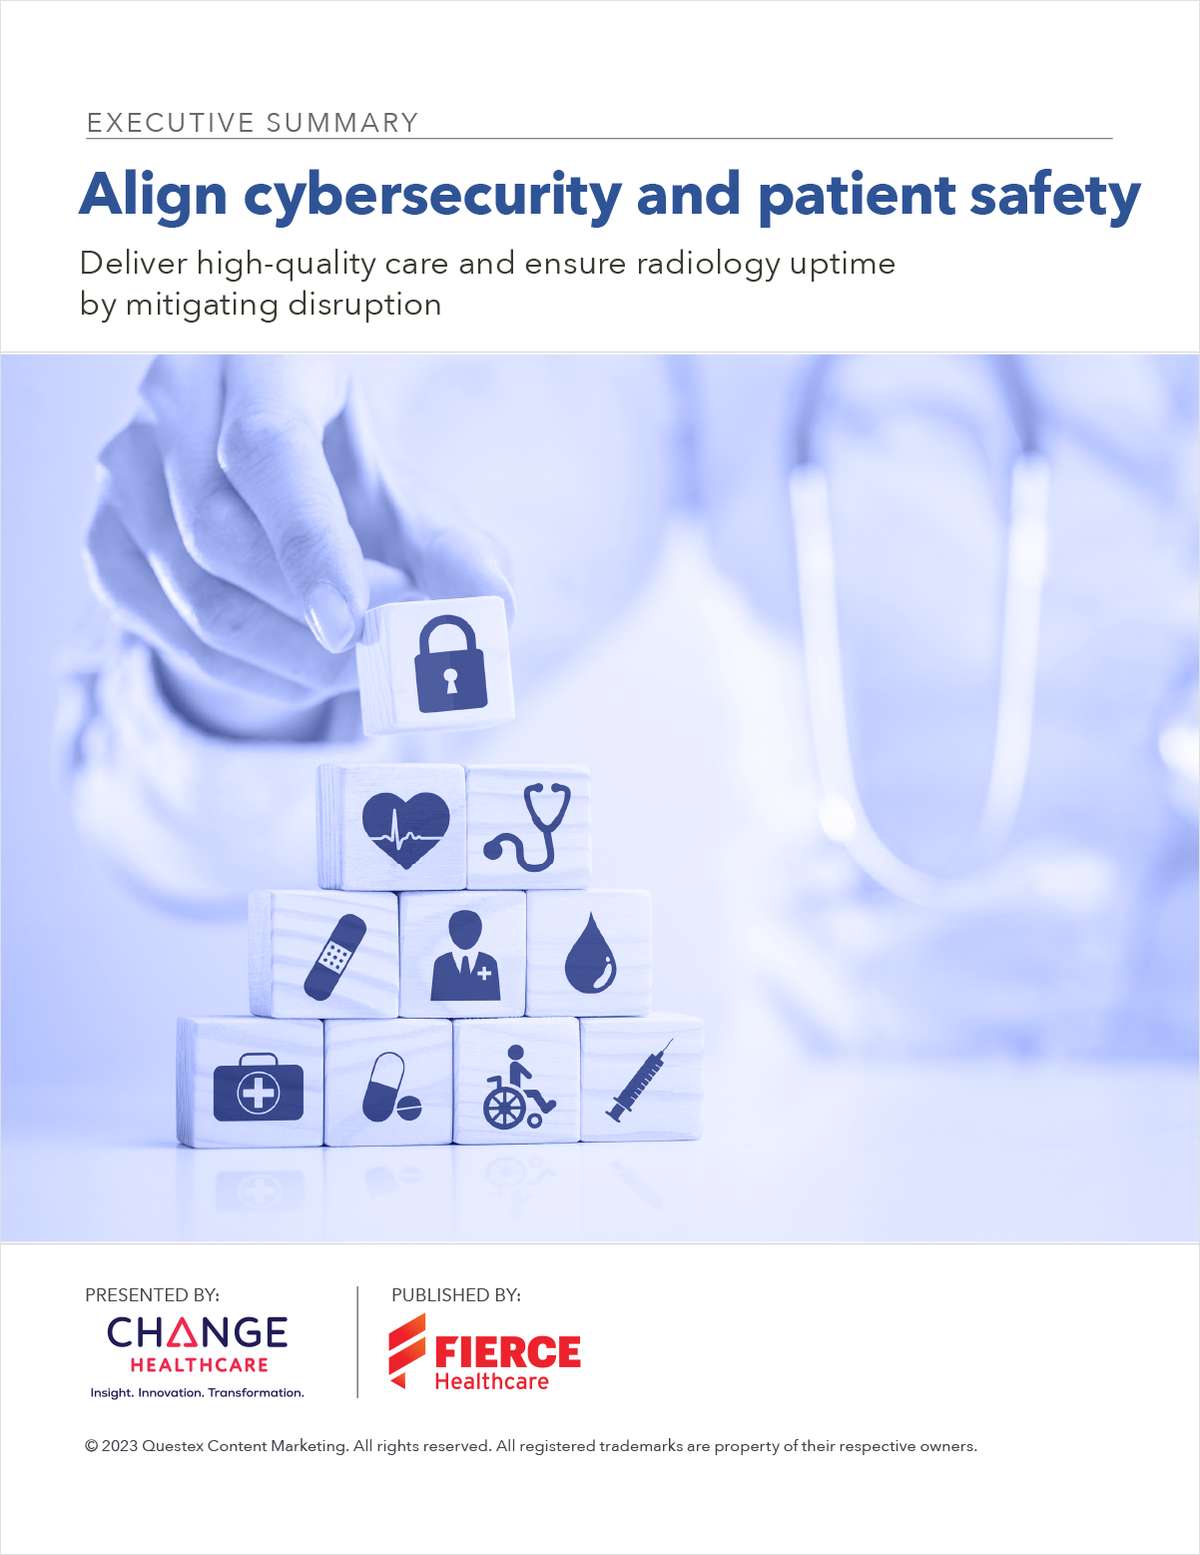 Align cybersecurity and patient safety